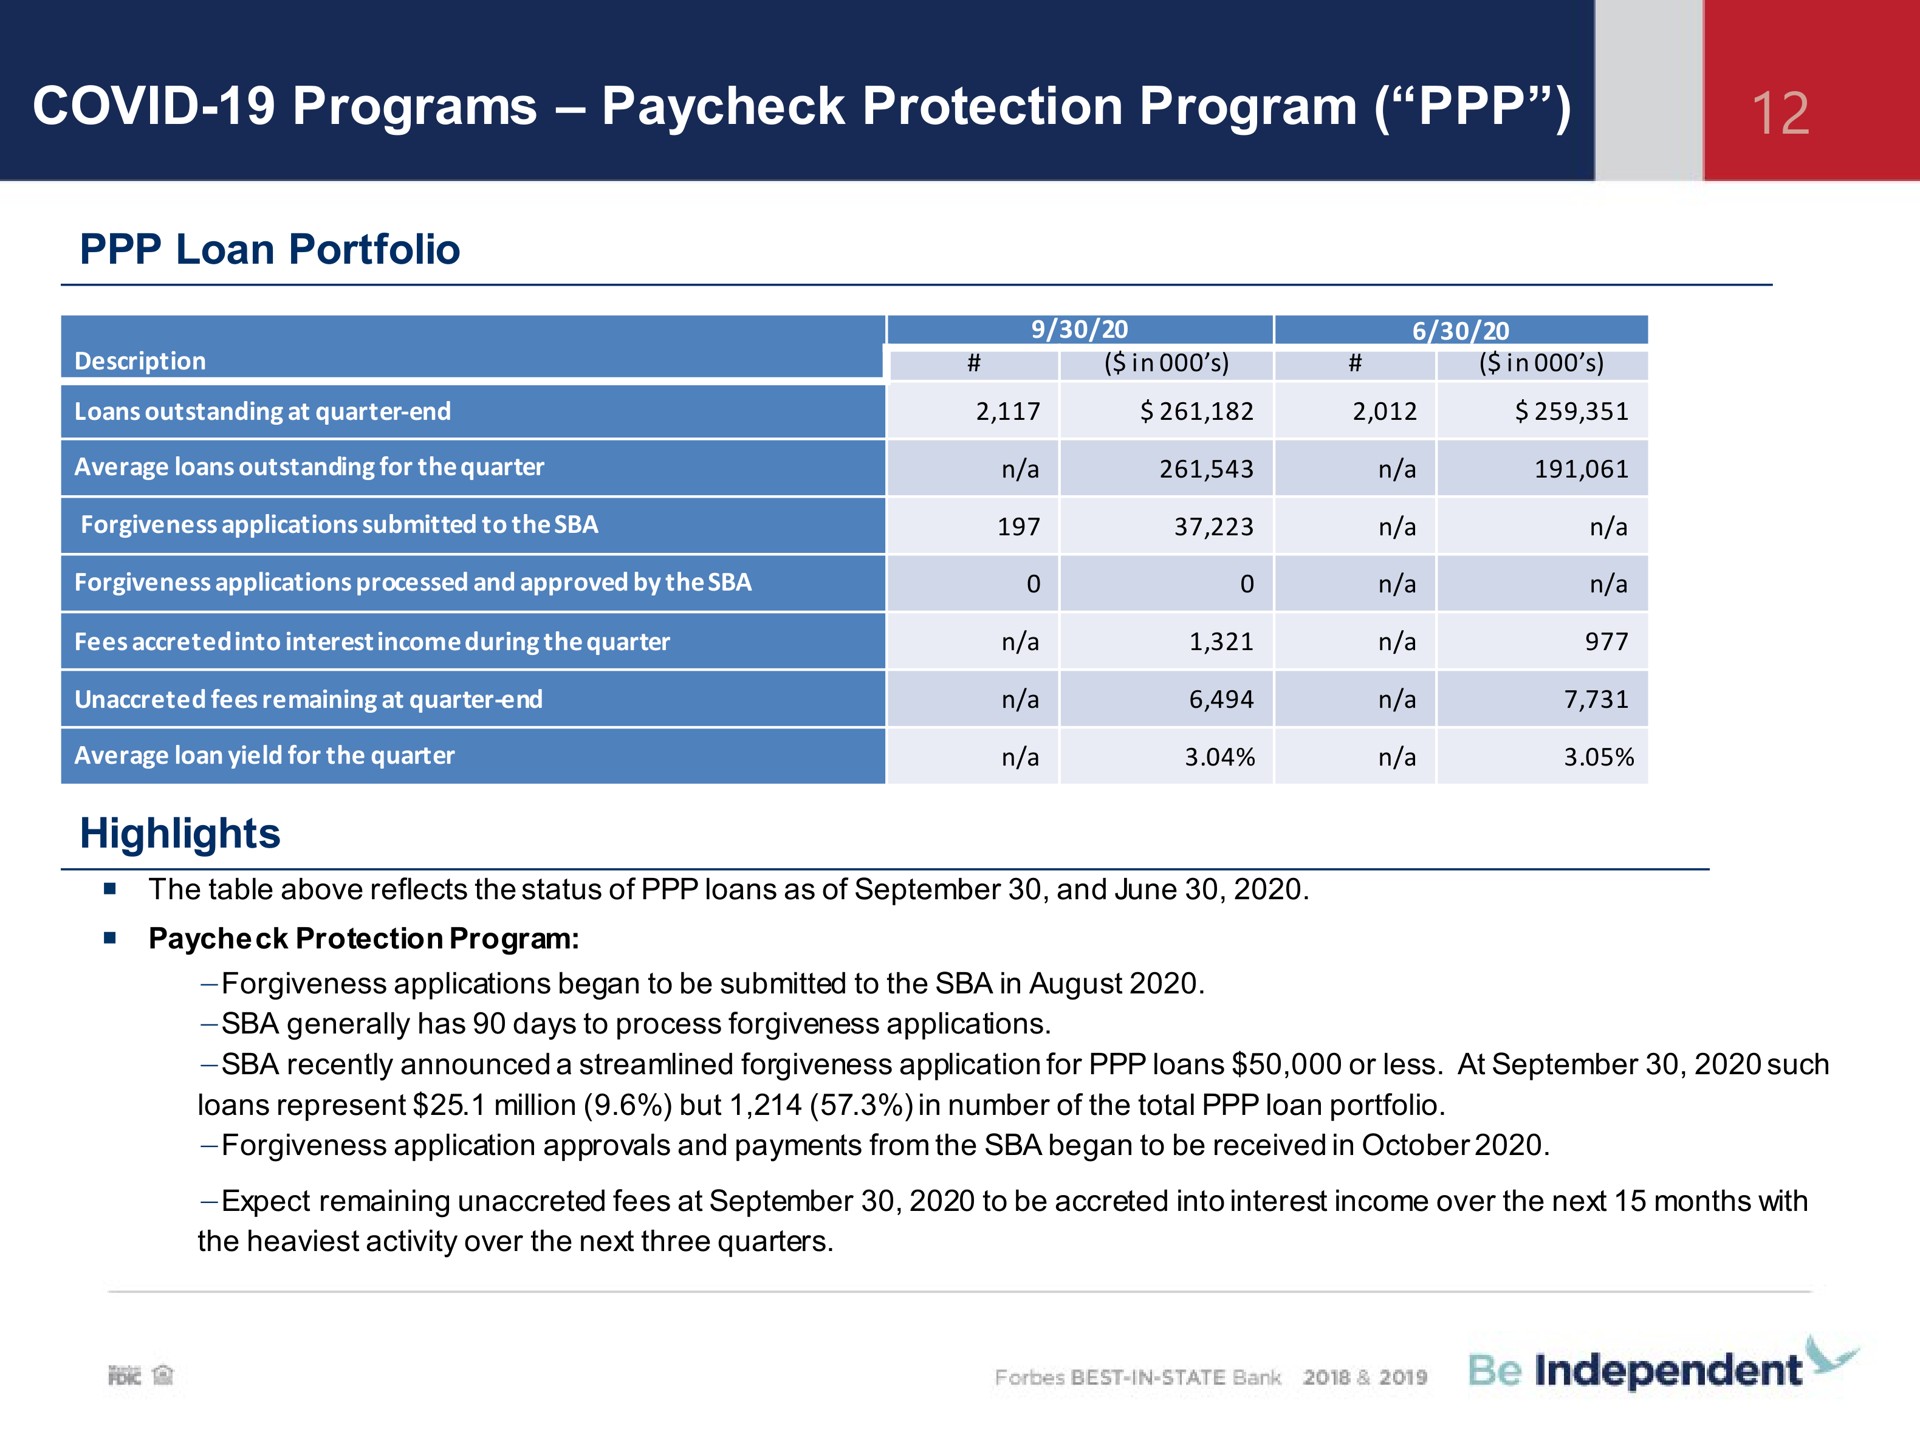 covid programs protection program loan portfolio highlights | Independent Bank Corp